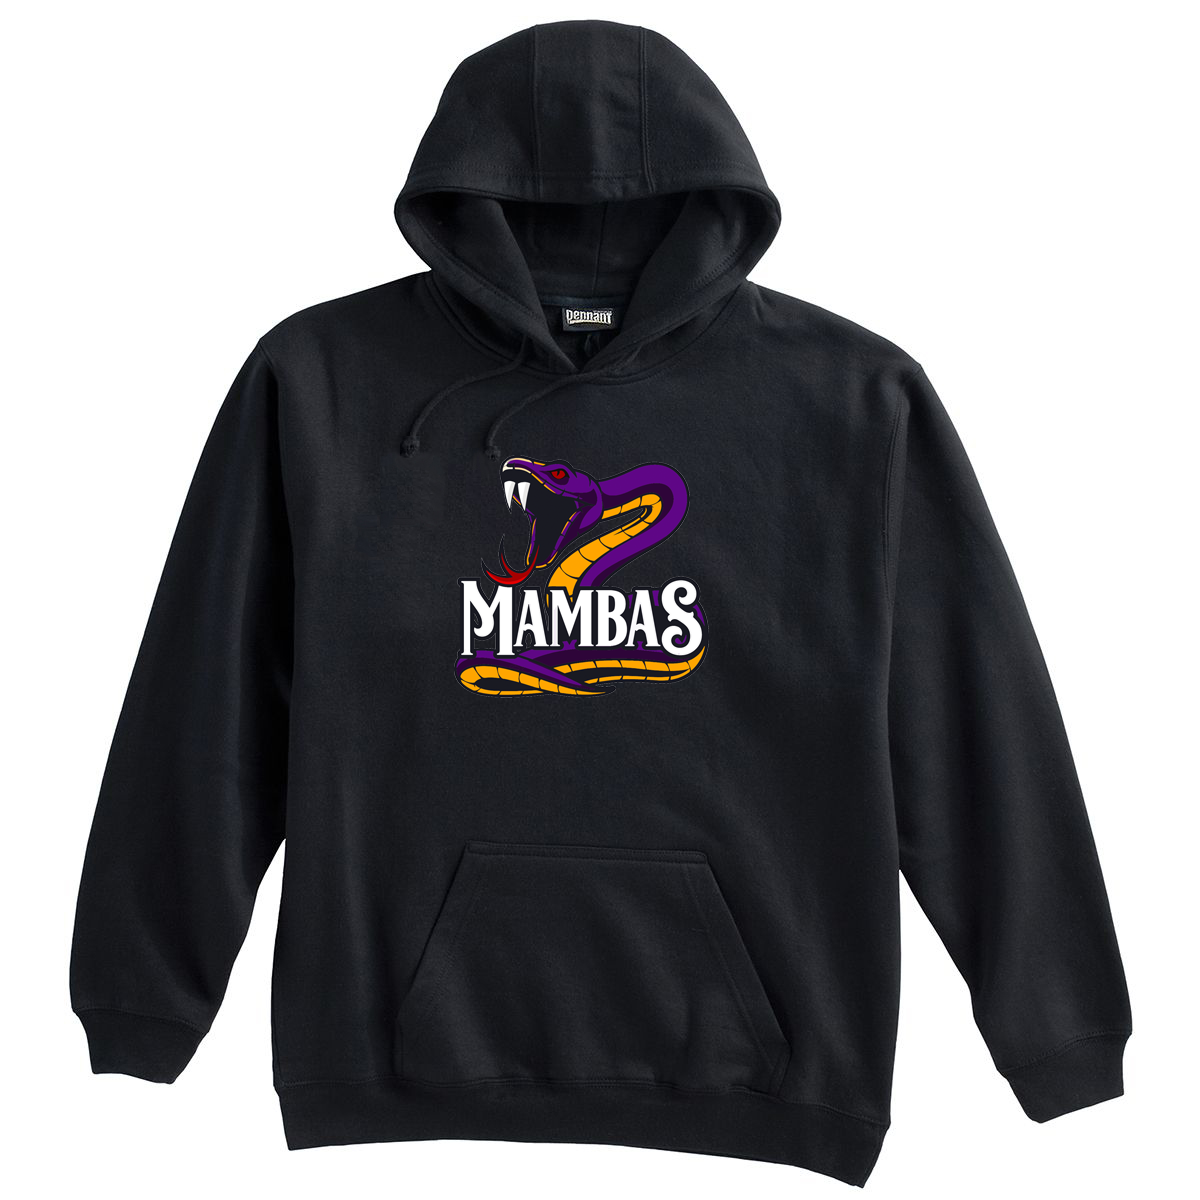 Mambas Basketball Sweatshirt (Available in Youth Sizes)